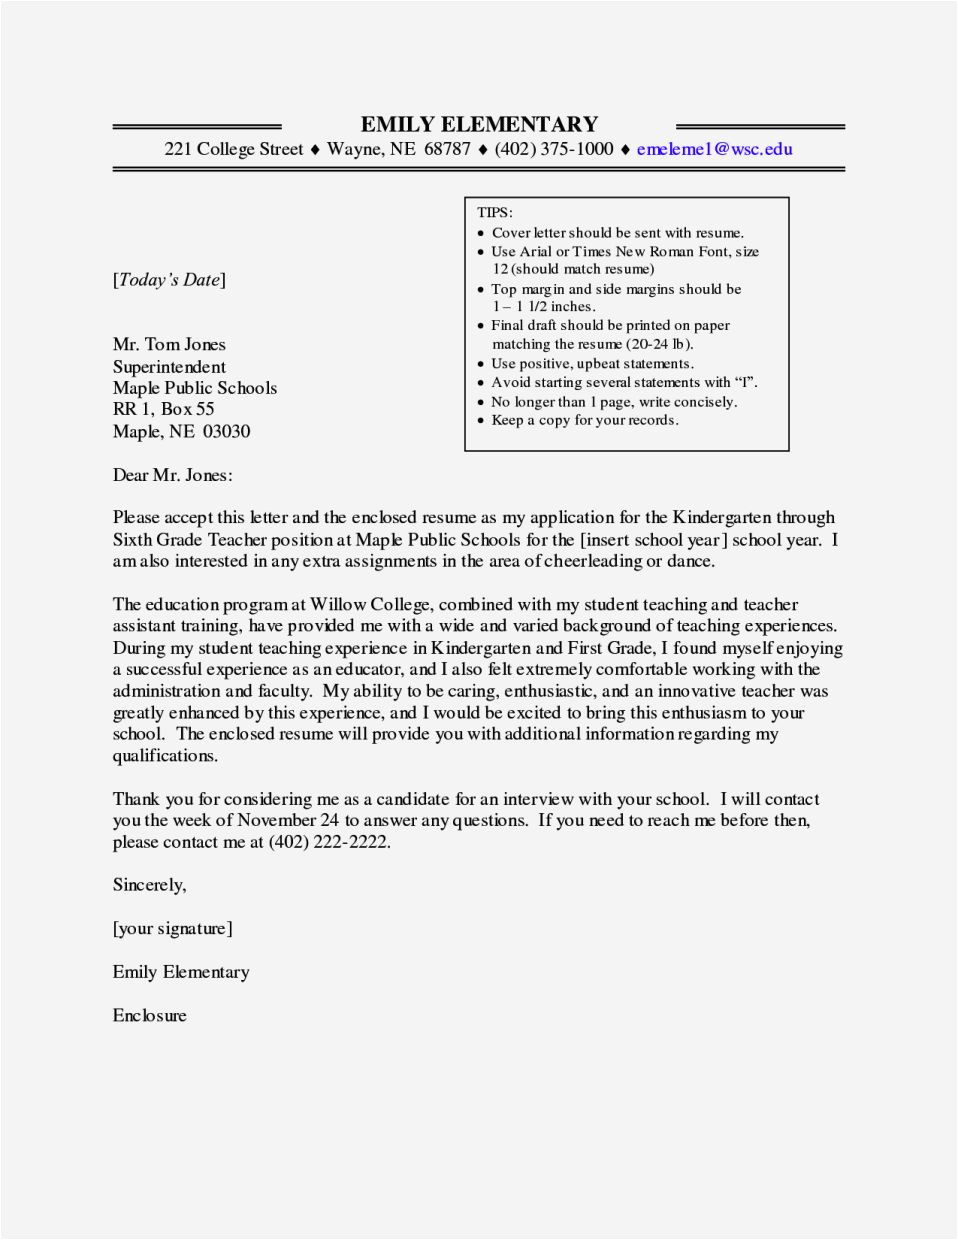 application letter for teaching position with no experience